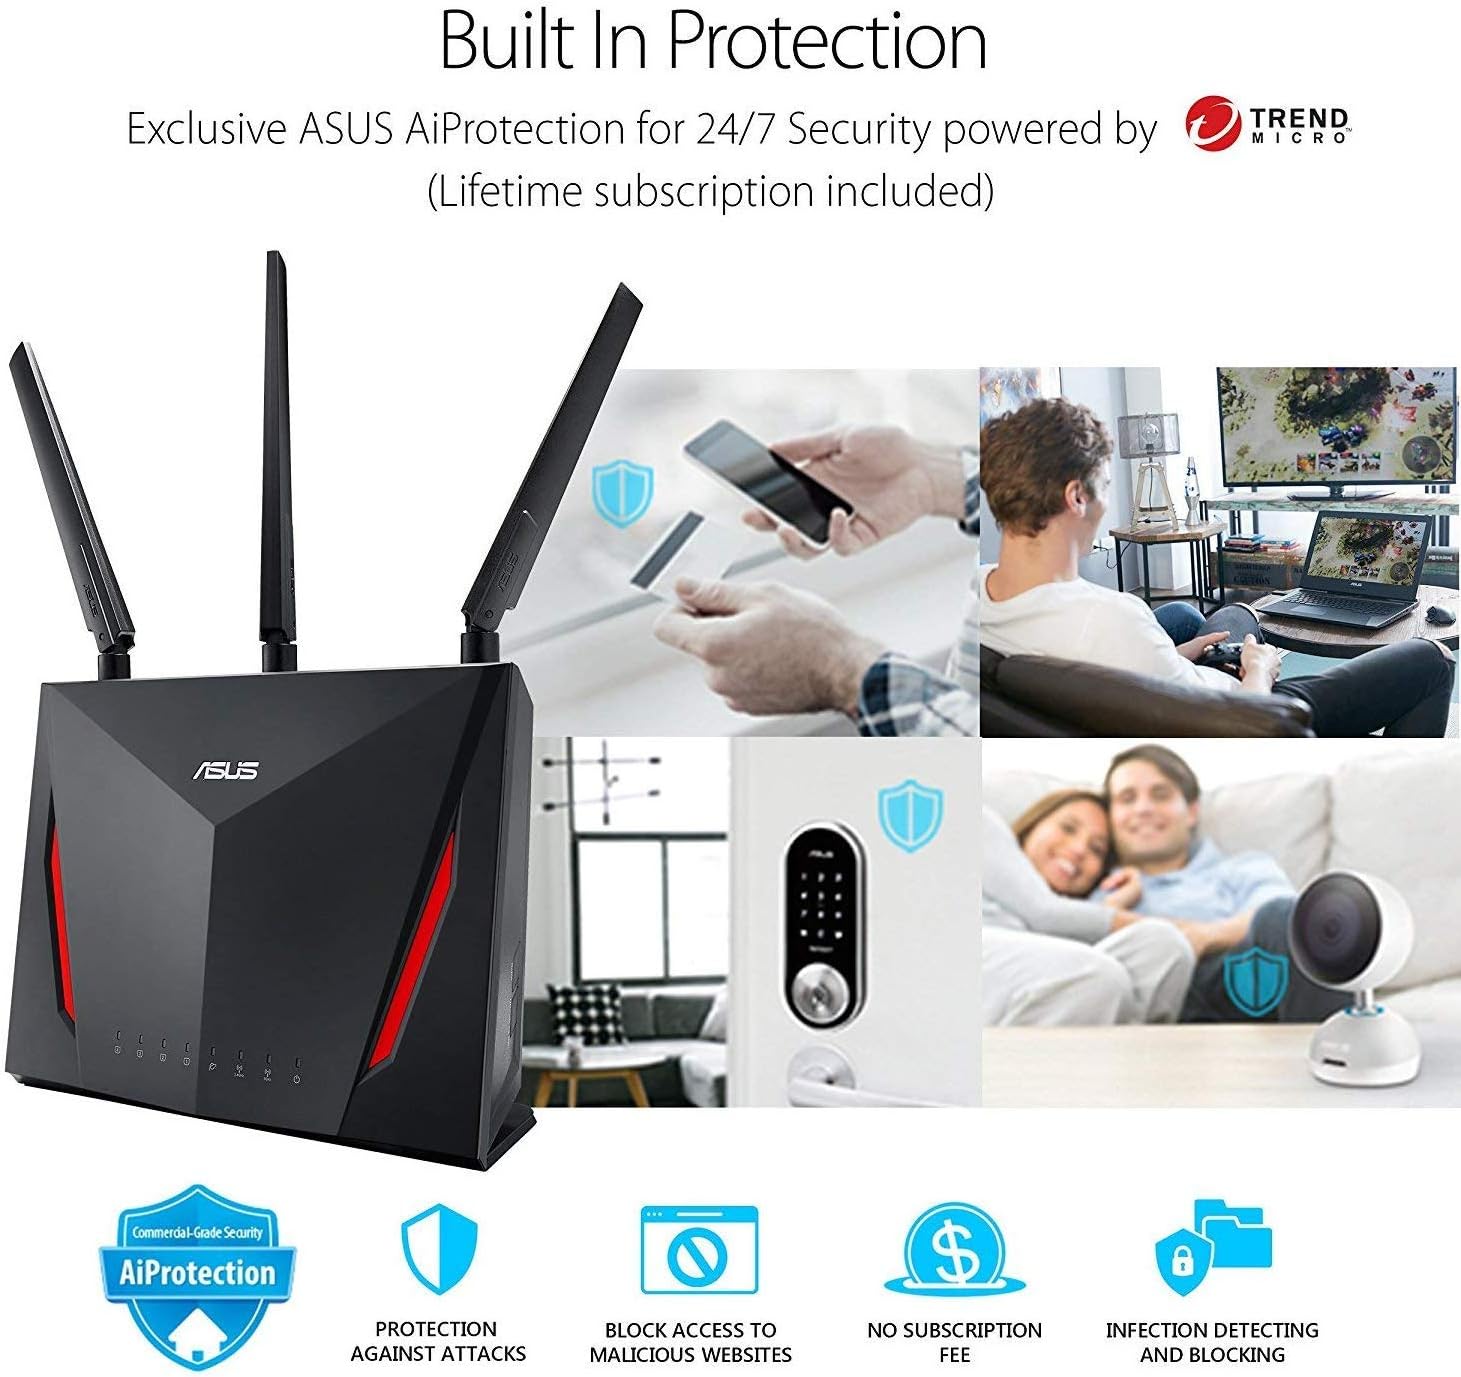 ASUS RT-AC86U: Dual-Band AC2900 Router with MU-MIMO Technology 4716659214199E